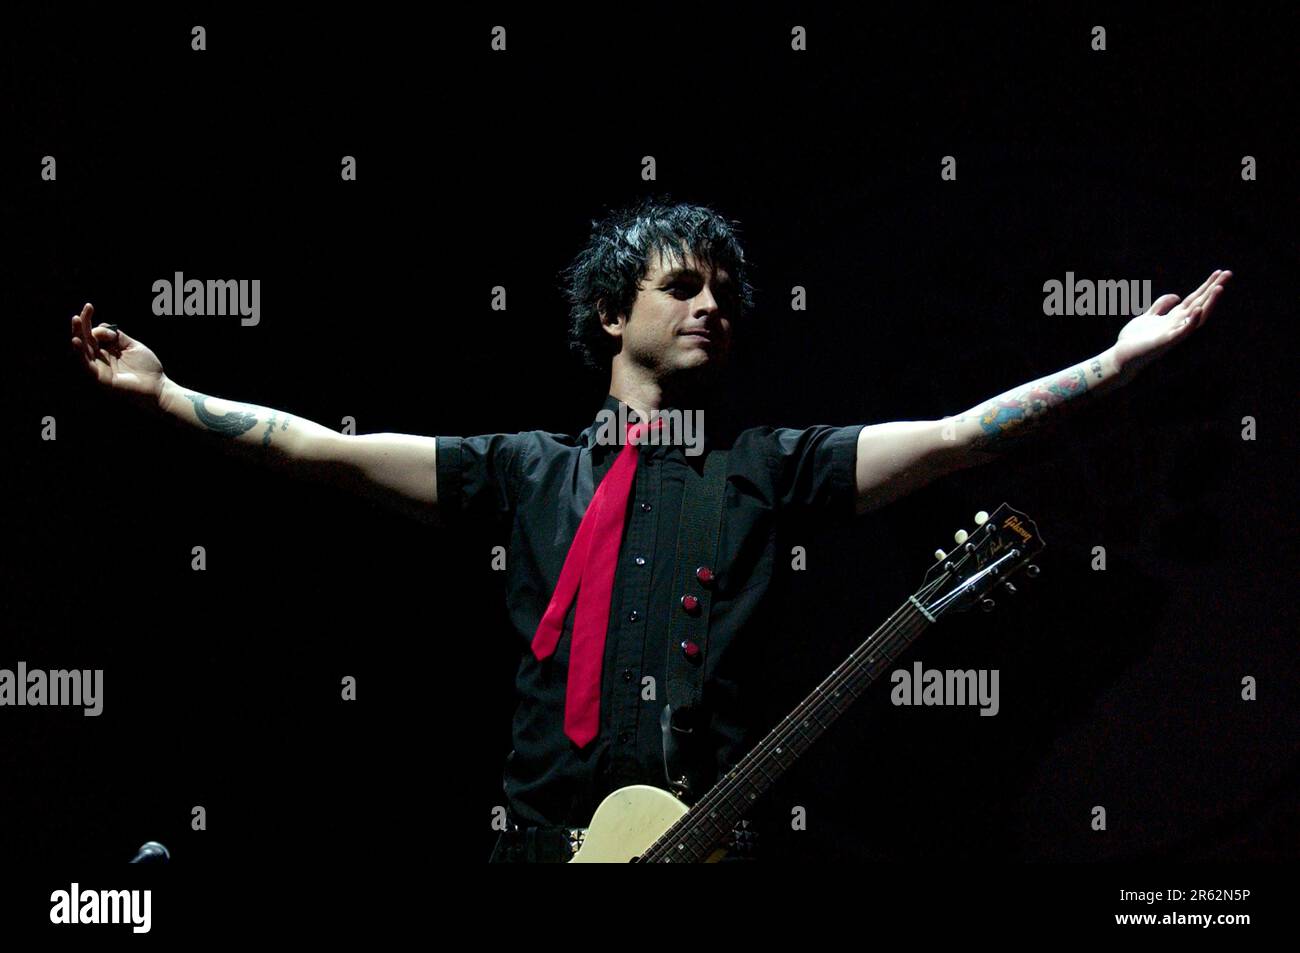 Milan Italy 2005-01-16: Billie Joe Armstrong singer and guitarist of Green Day during live concert at the Forum Assago Stock Photo